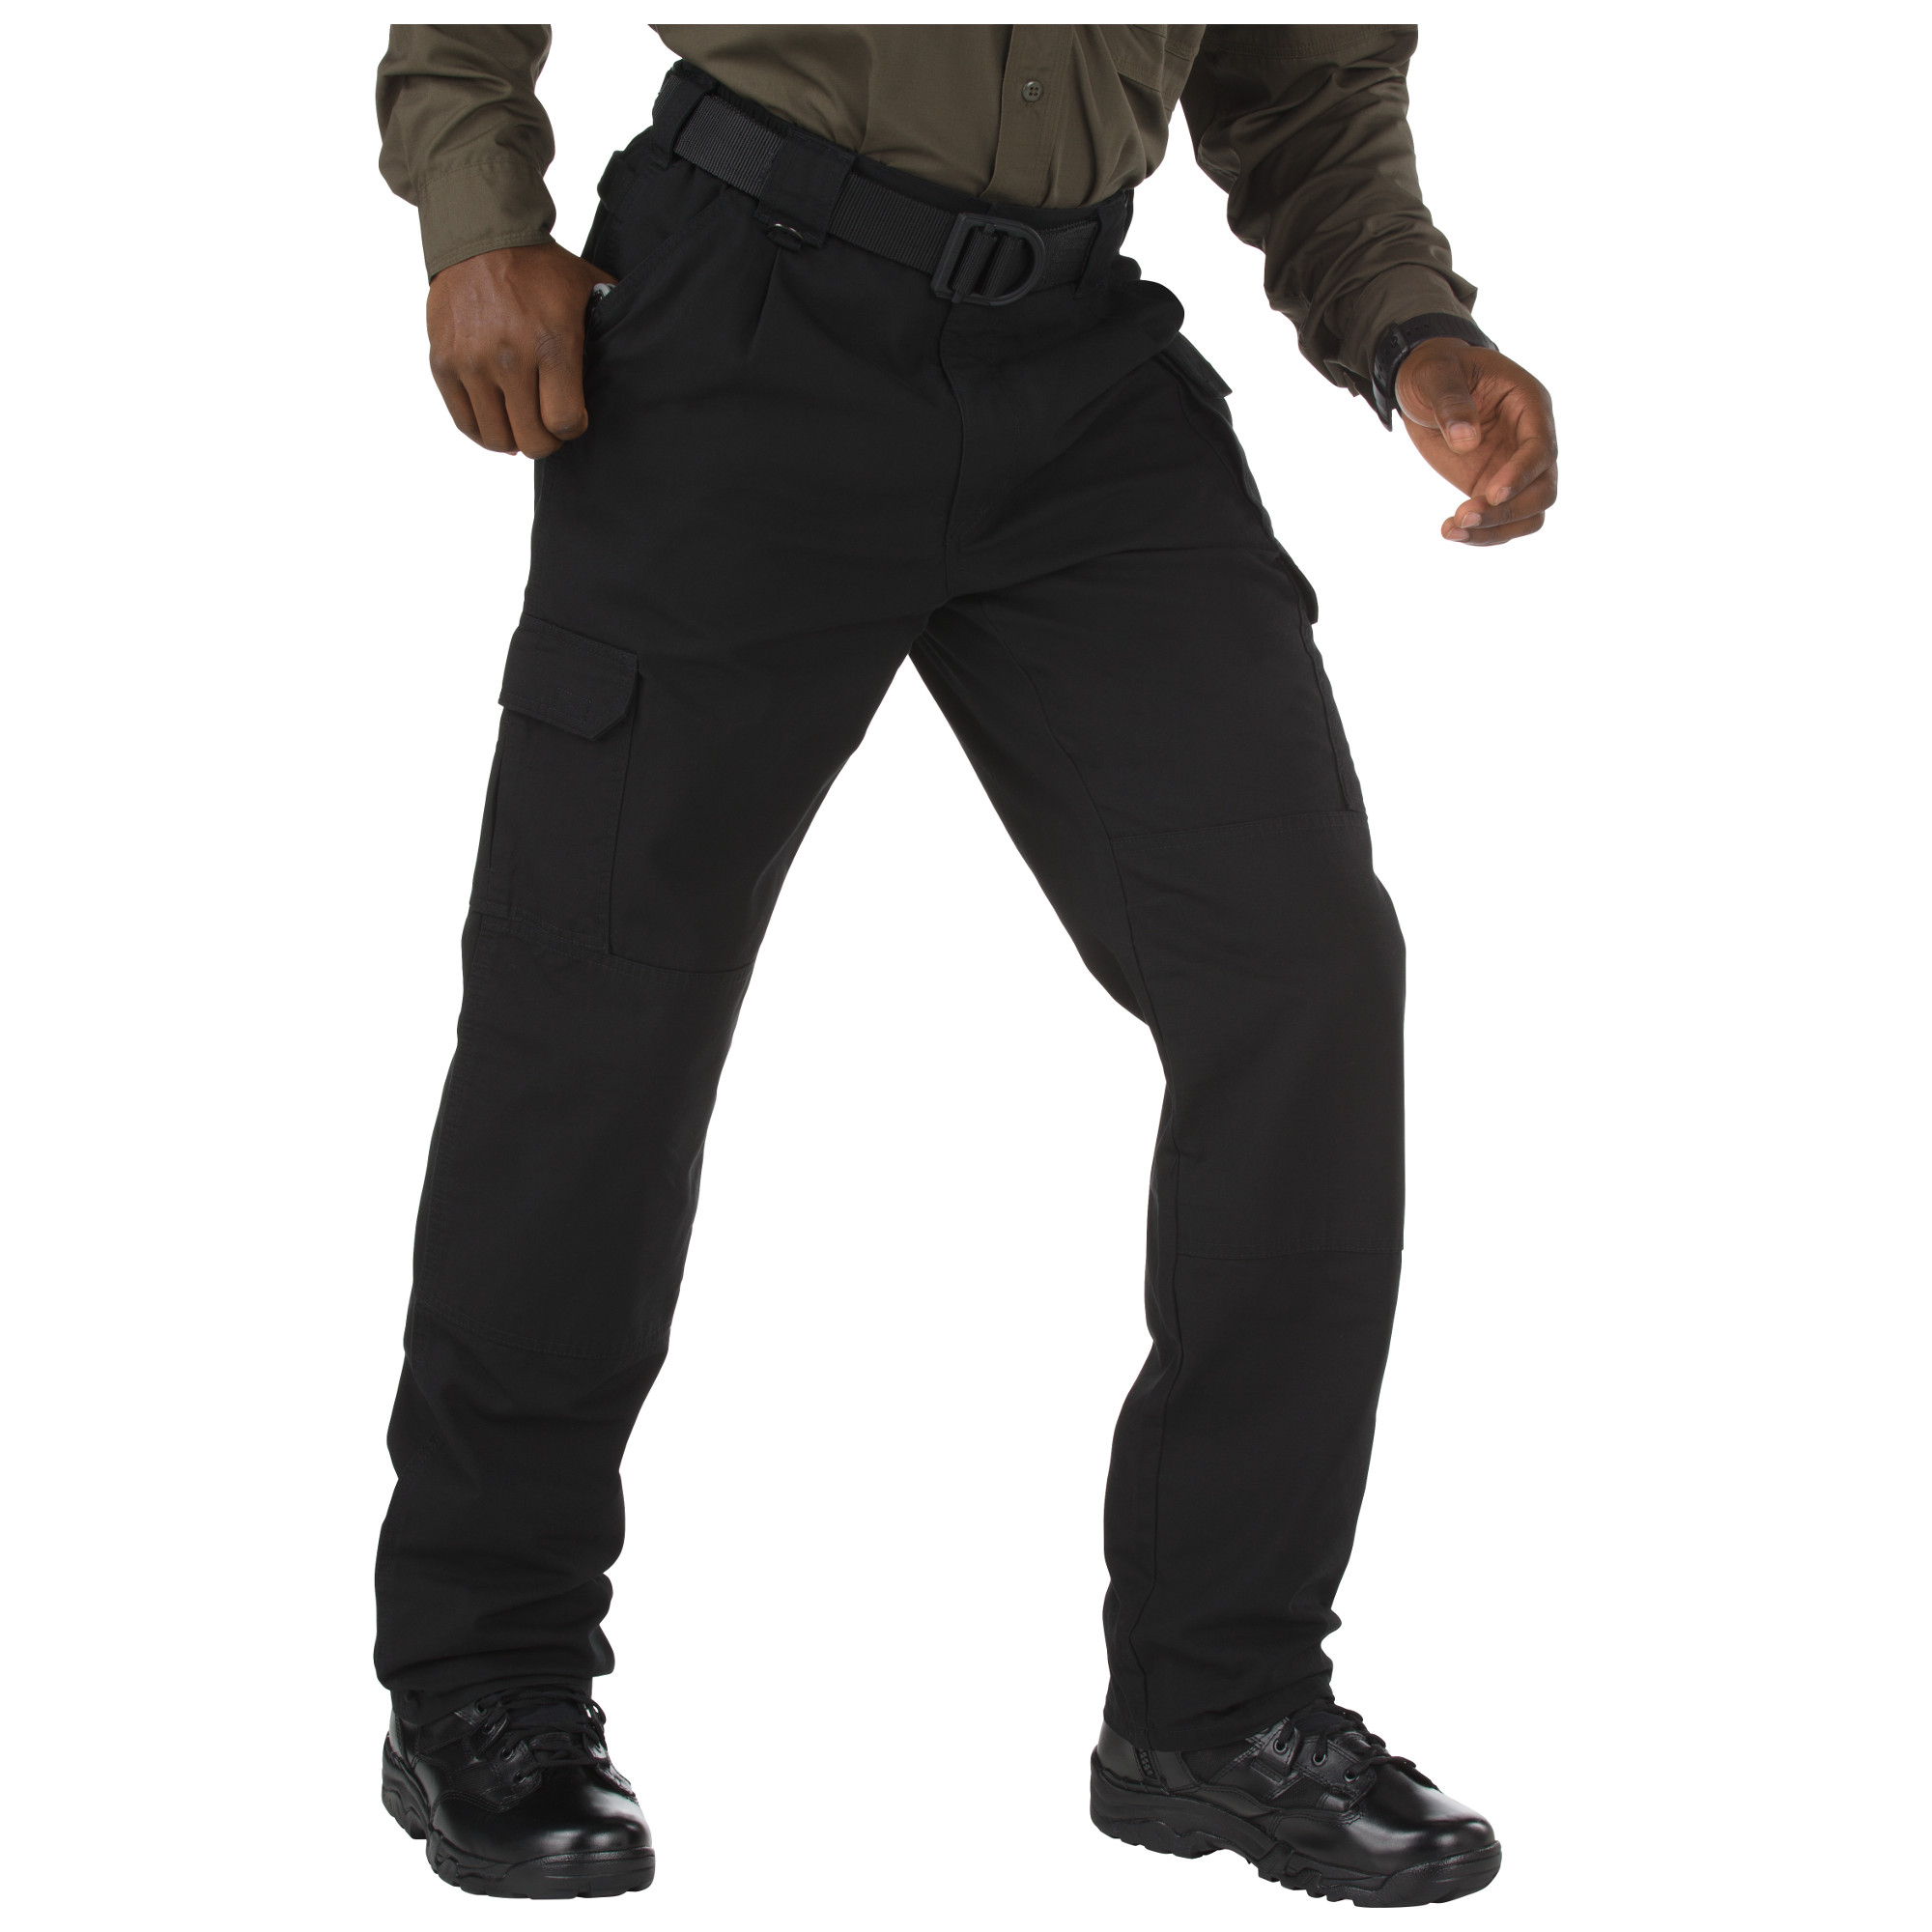 Mens Pants Combat Tactical Men Large Multi Pocket Army Cargo Casual Cotton  Security Bodyguard Trouser From Paluo, $84.19 | DHgate.Com